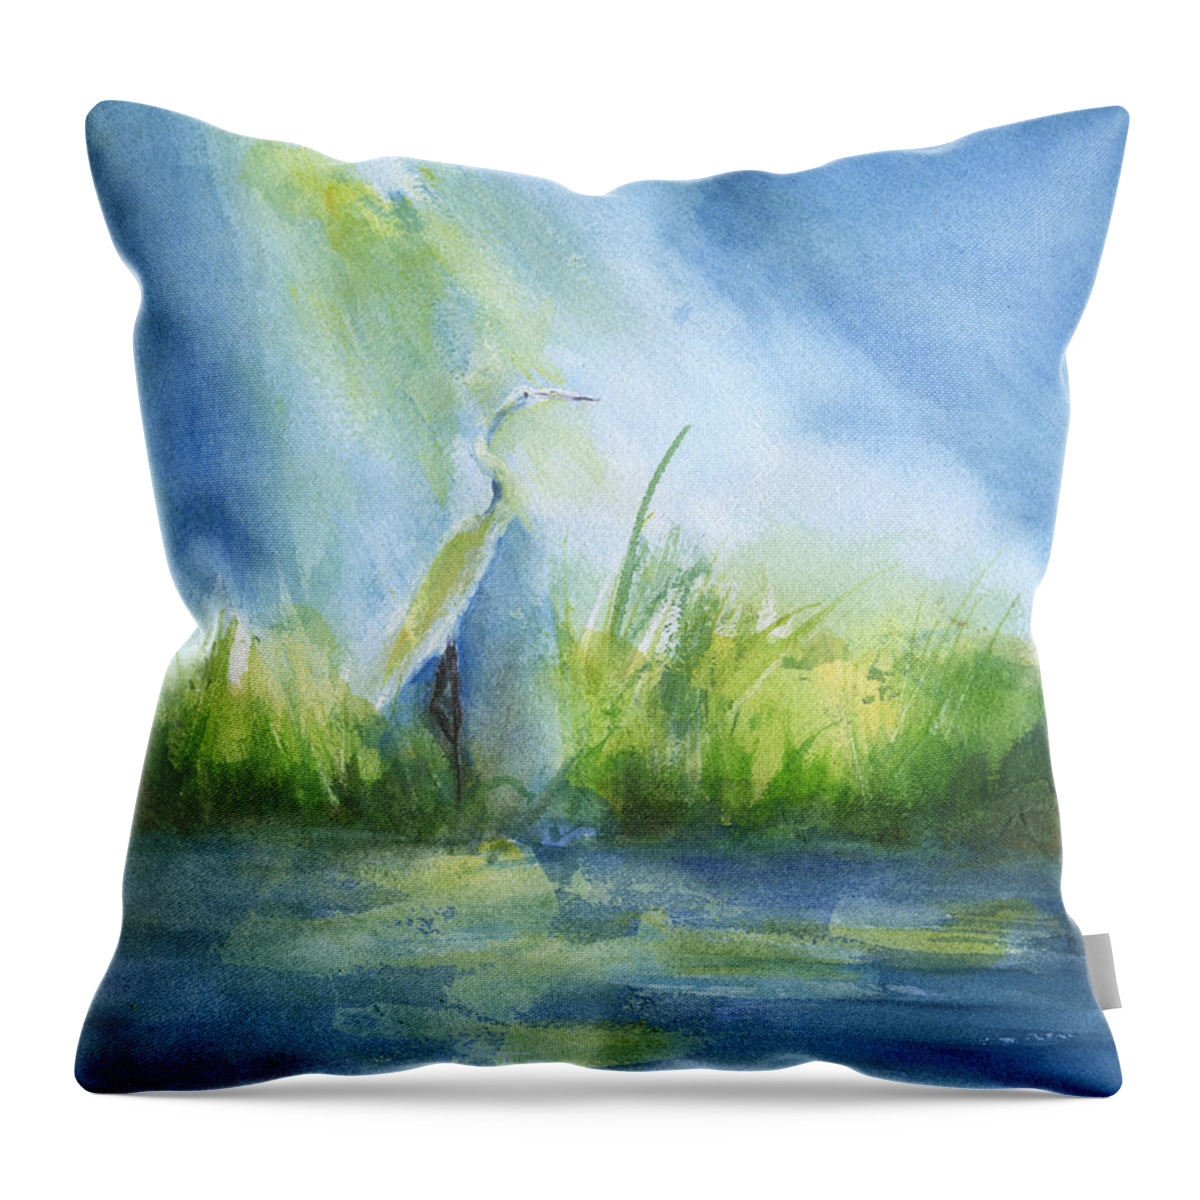 Egret In Sunlight Throw Pillow featuring the painting Egret In Sunlight by Frank Bright